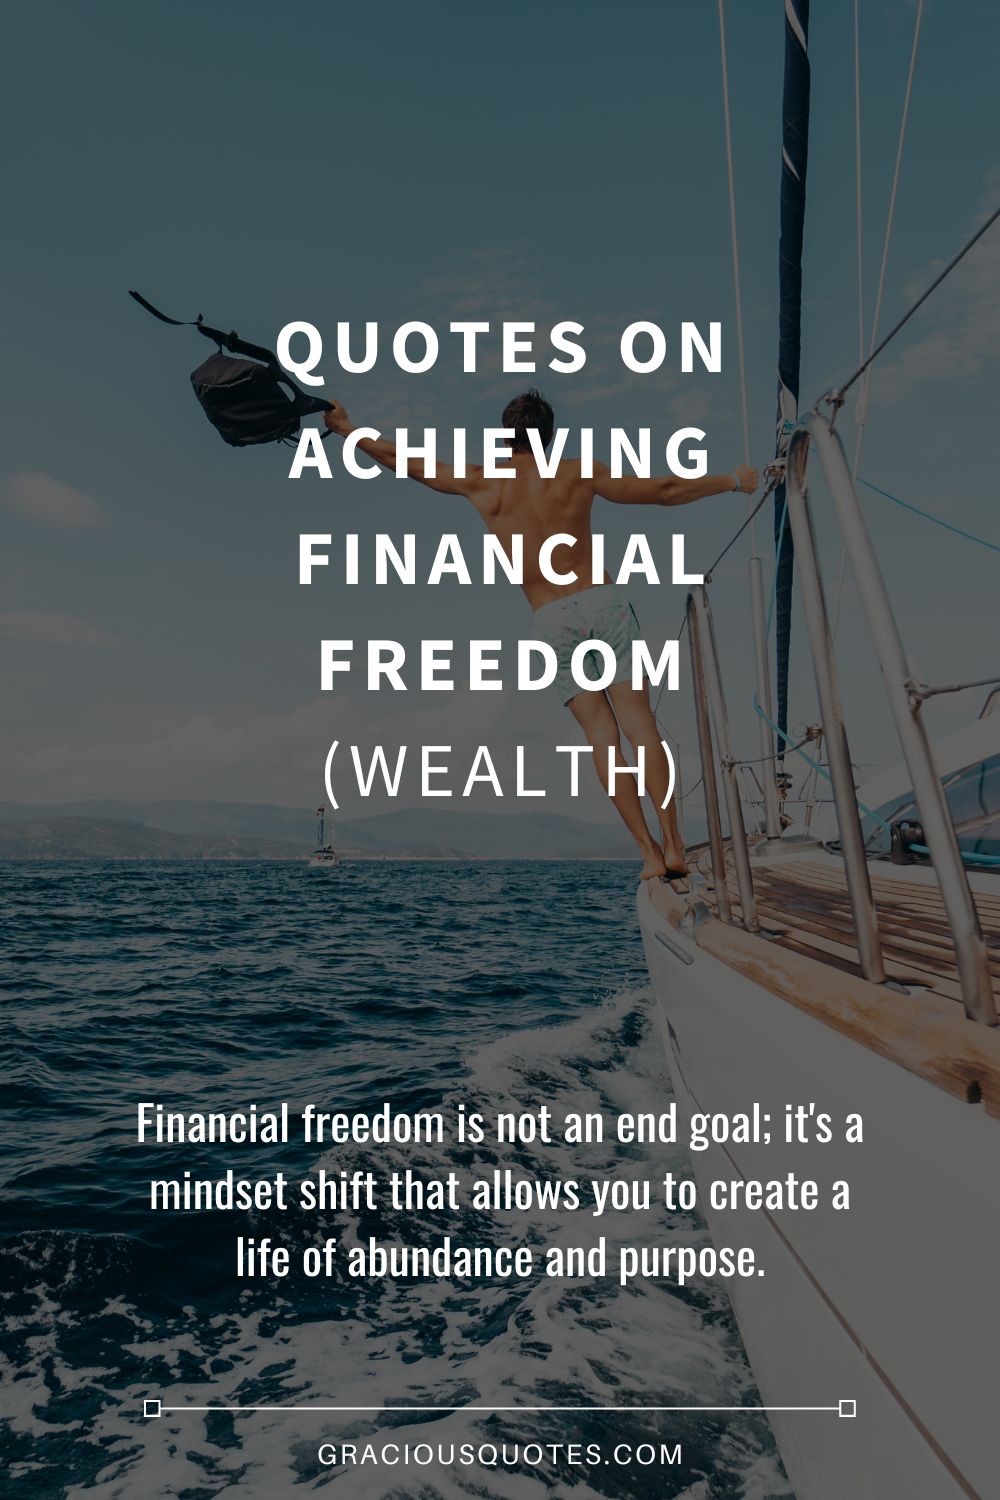 Quotes on Achieving Financial Freedom (WEALTH) - Gracious Quotes